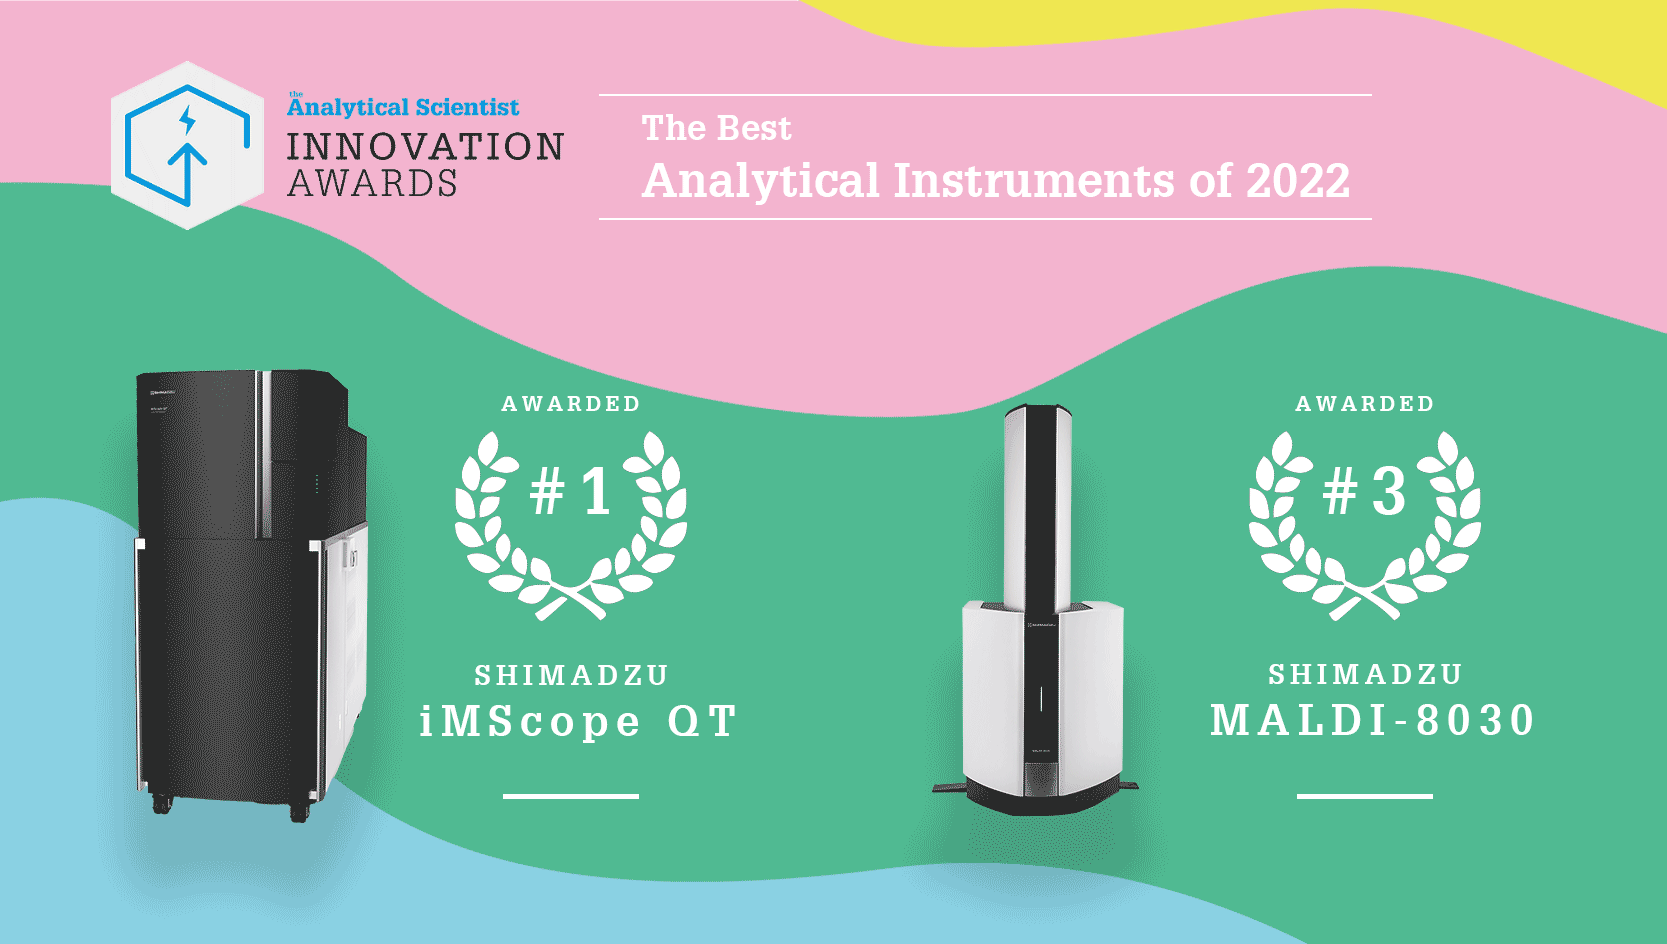 The best analytical instruments of 2022